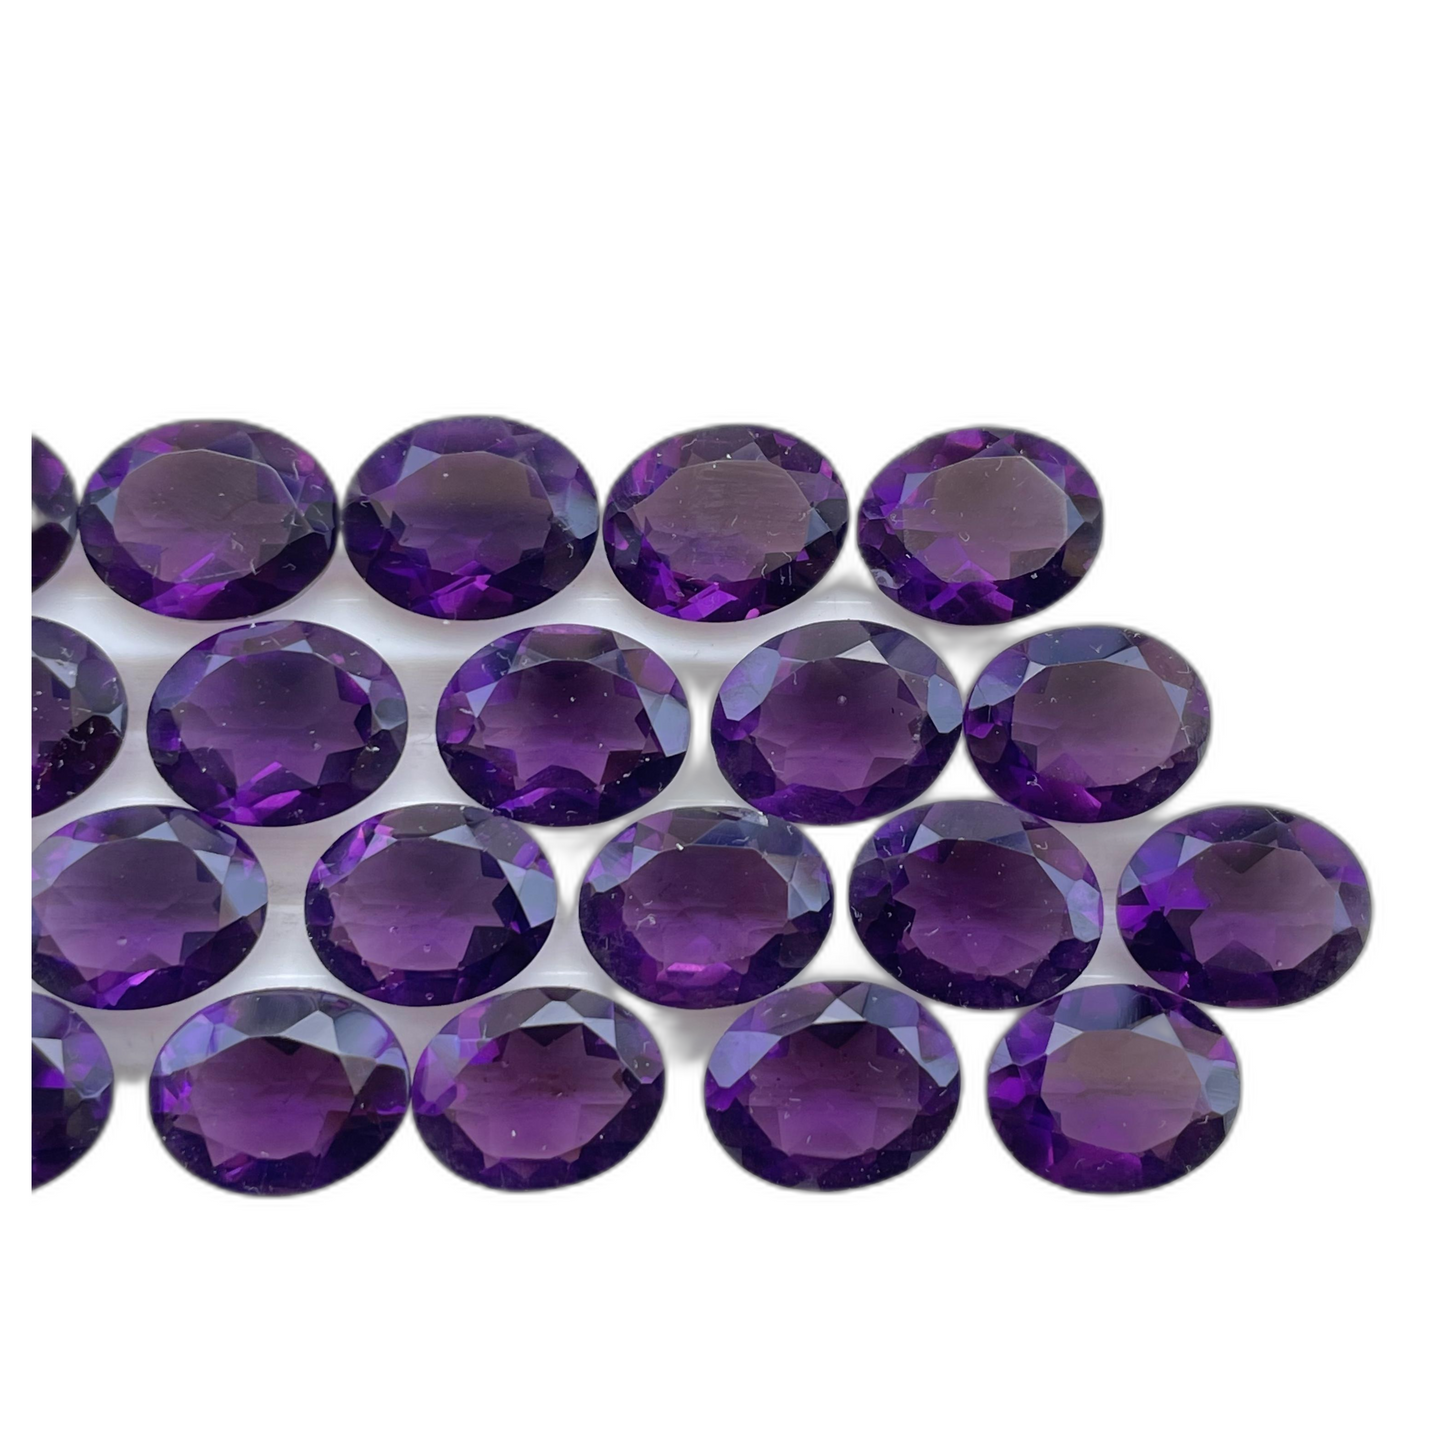 Purple Amethyst Faceted Nice Quality (8-10 mm) Oval Shape